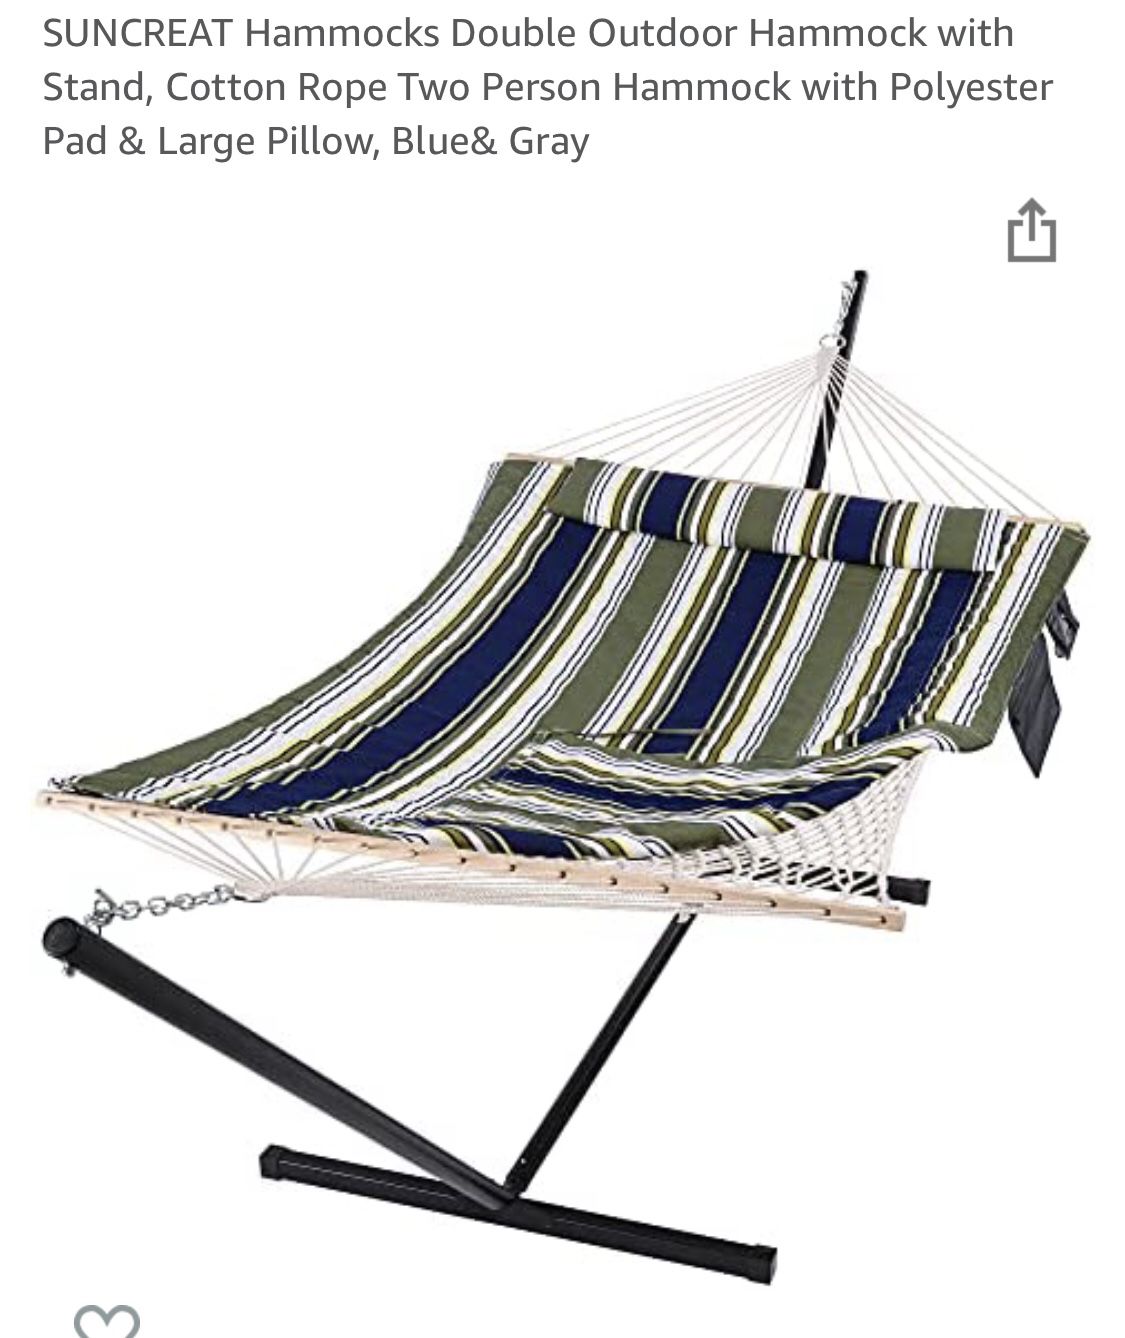 Hammocks Double Outdoor Hammock With Heavy Duty Stand, Cotton Rop Two Person Hammock With Polyester Pad & Large Pillow 